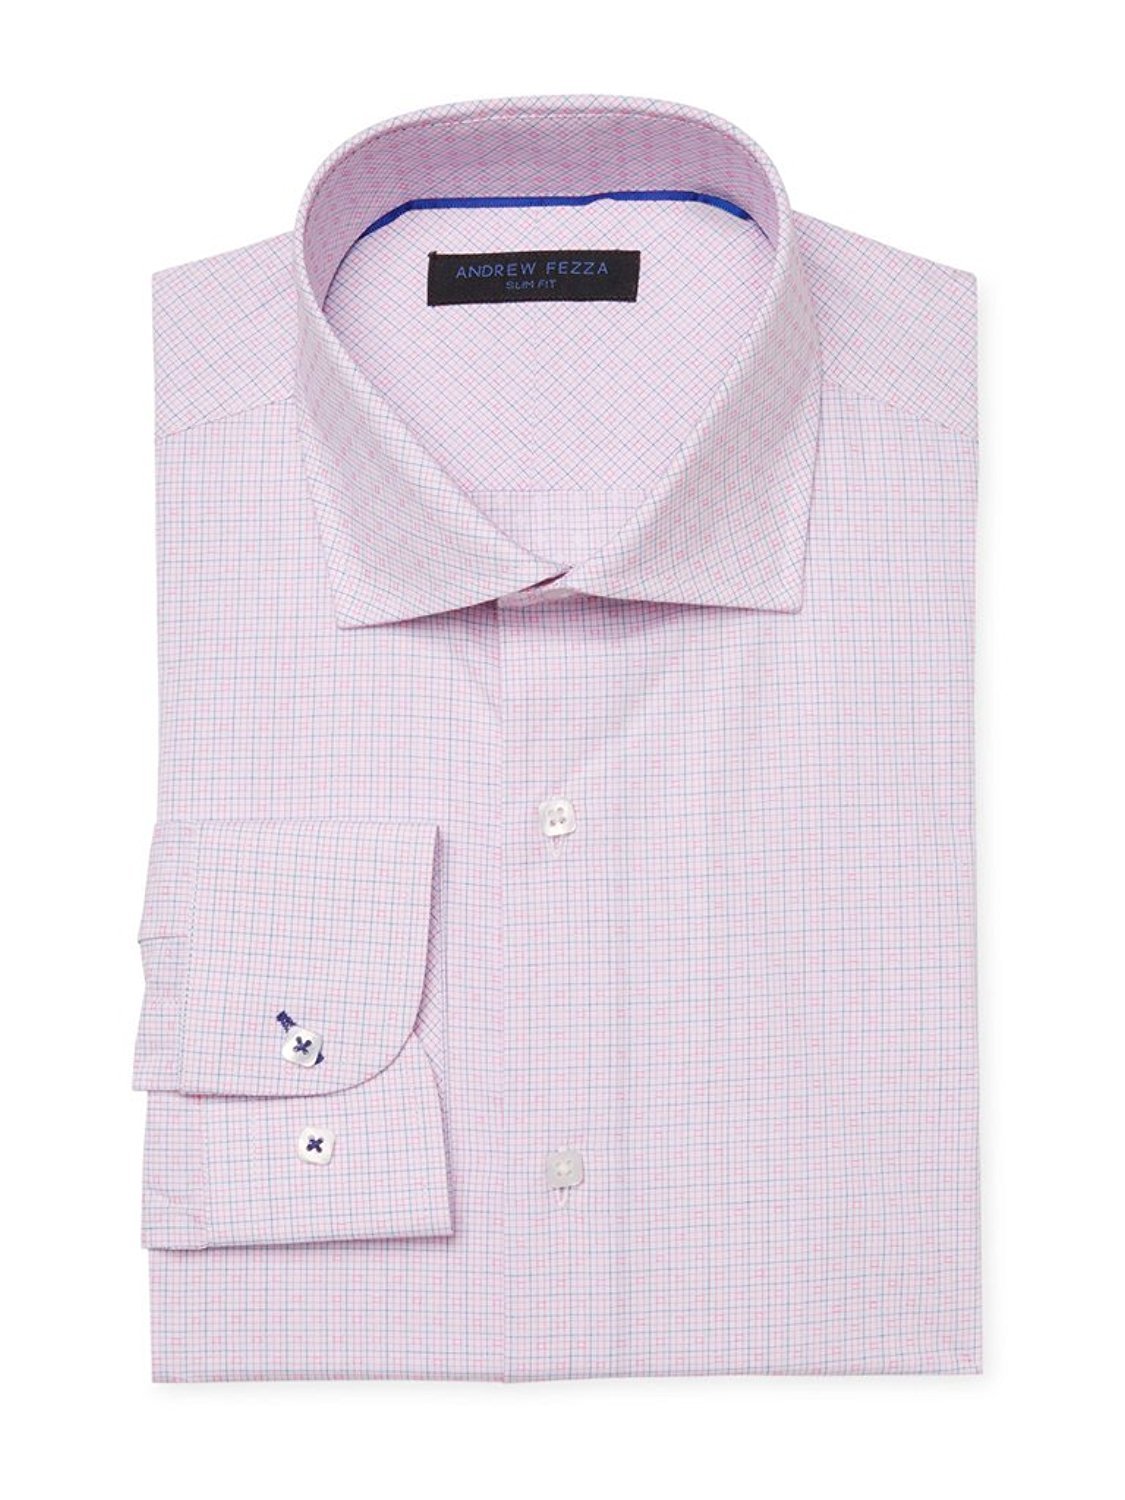 Andrew Fezza Men's Slim Fit Dress Shirt - Available in Many Patterns ...